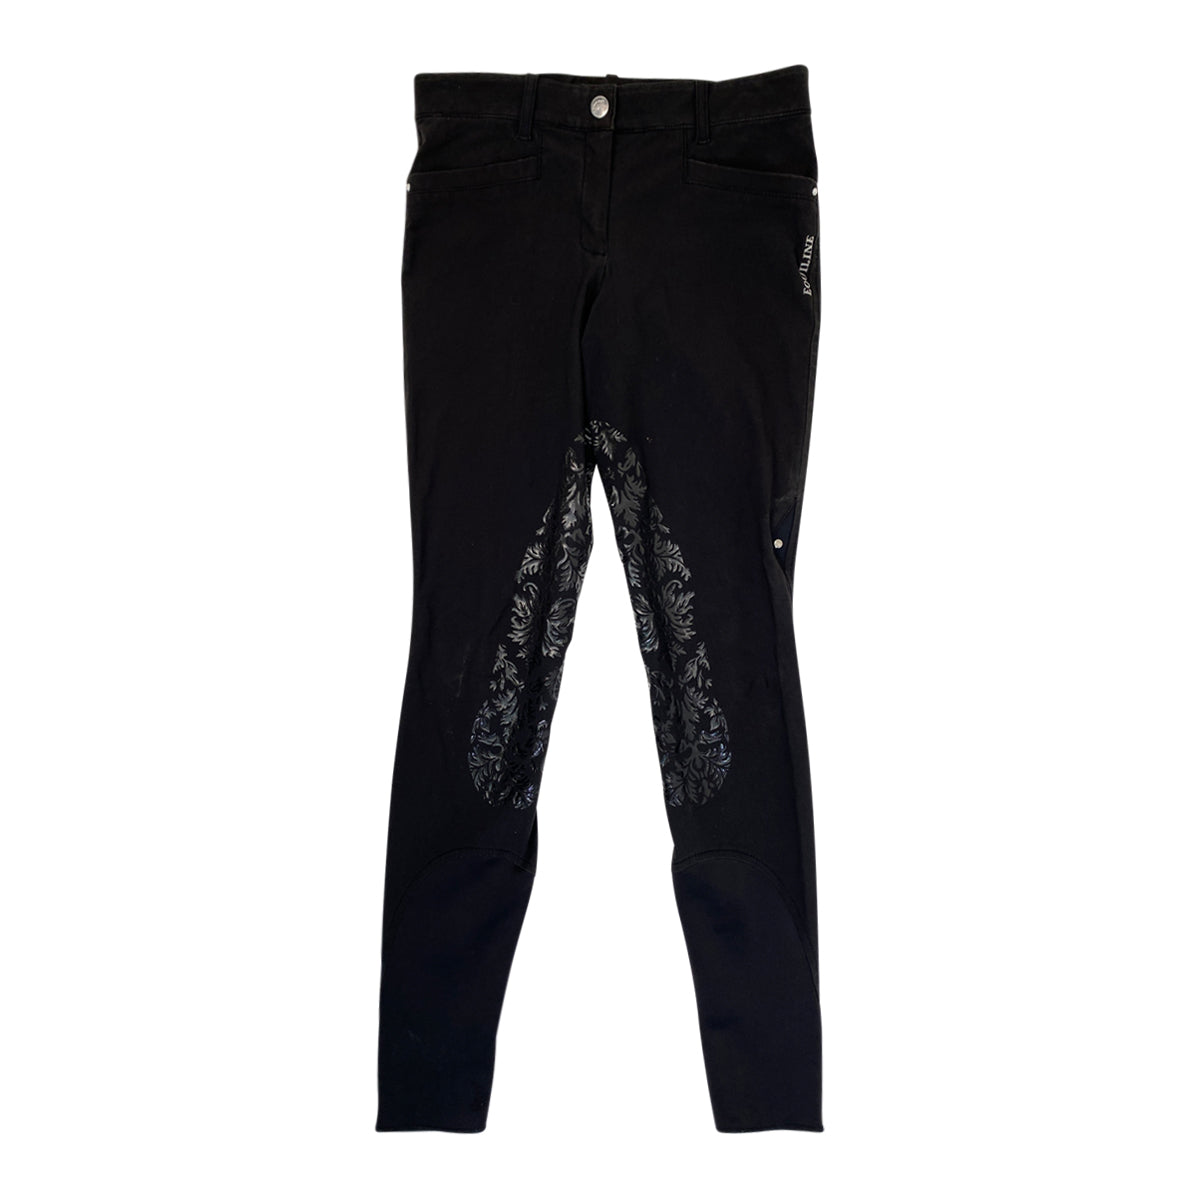 Equiline 'G-Zone' Breeches in Black Florals